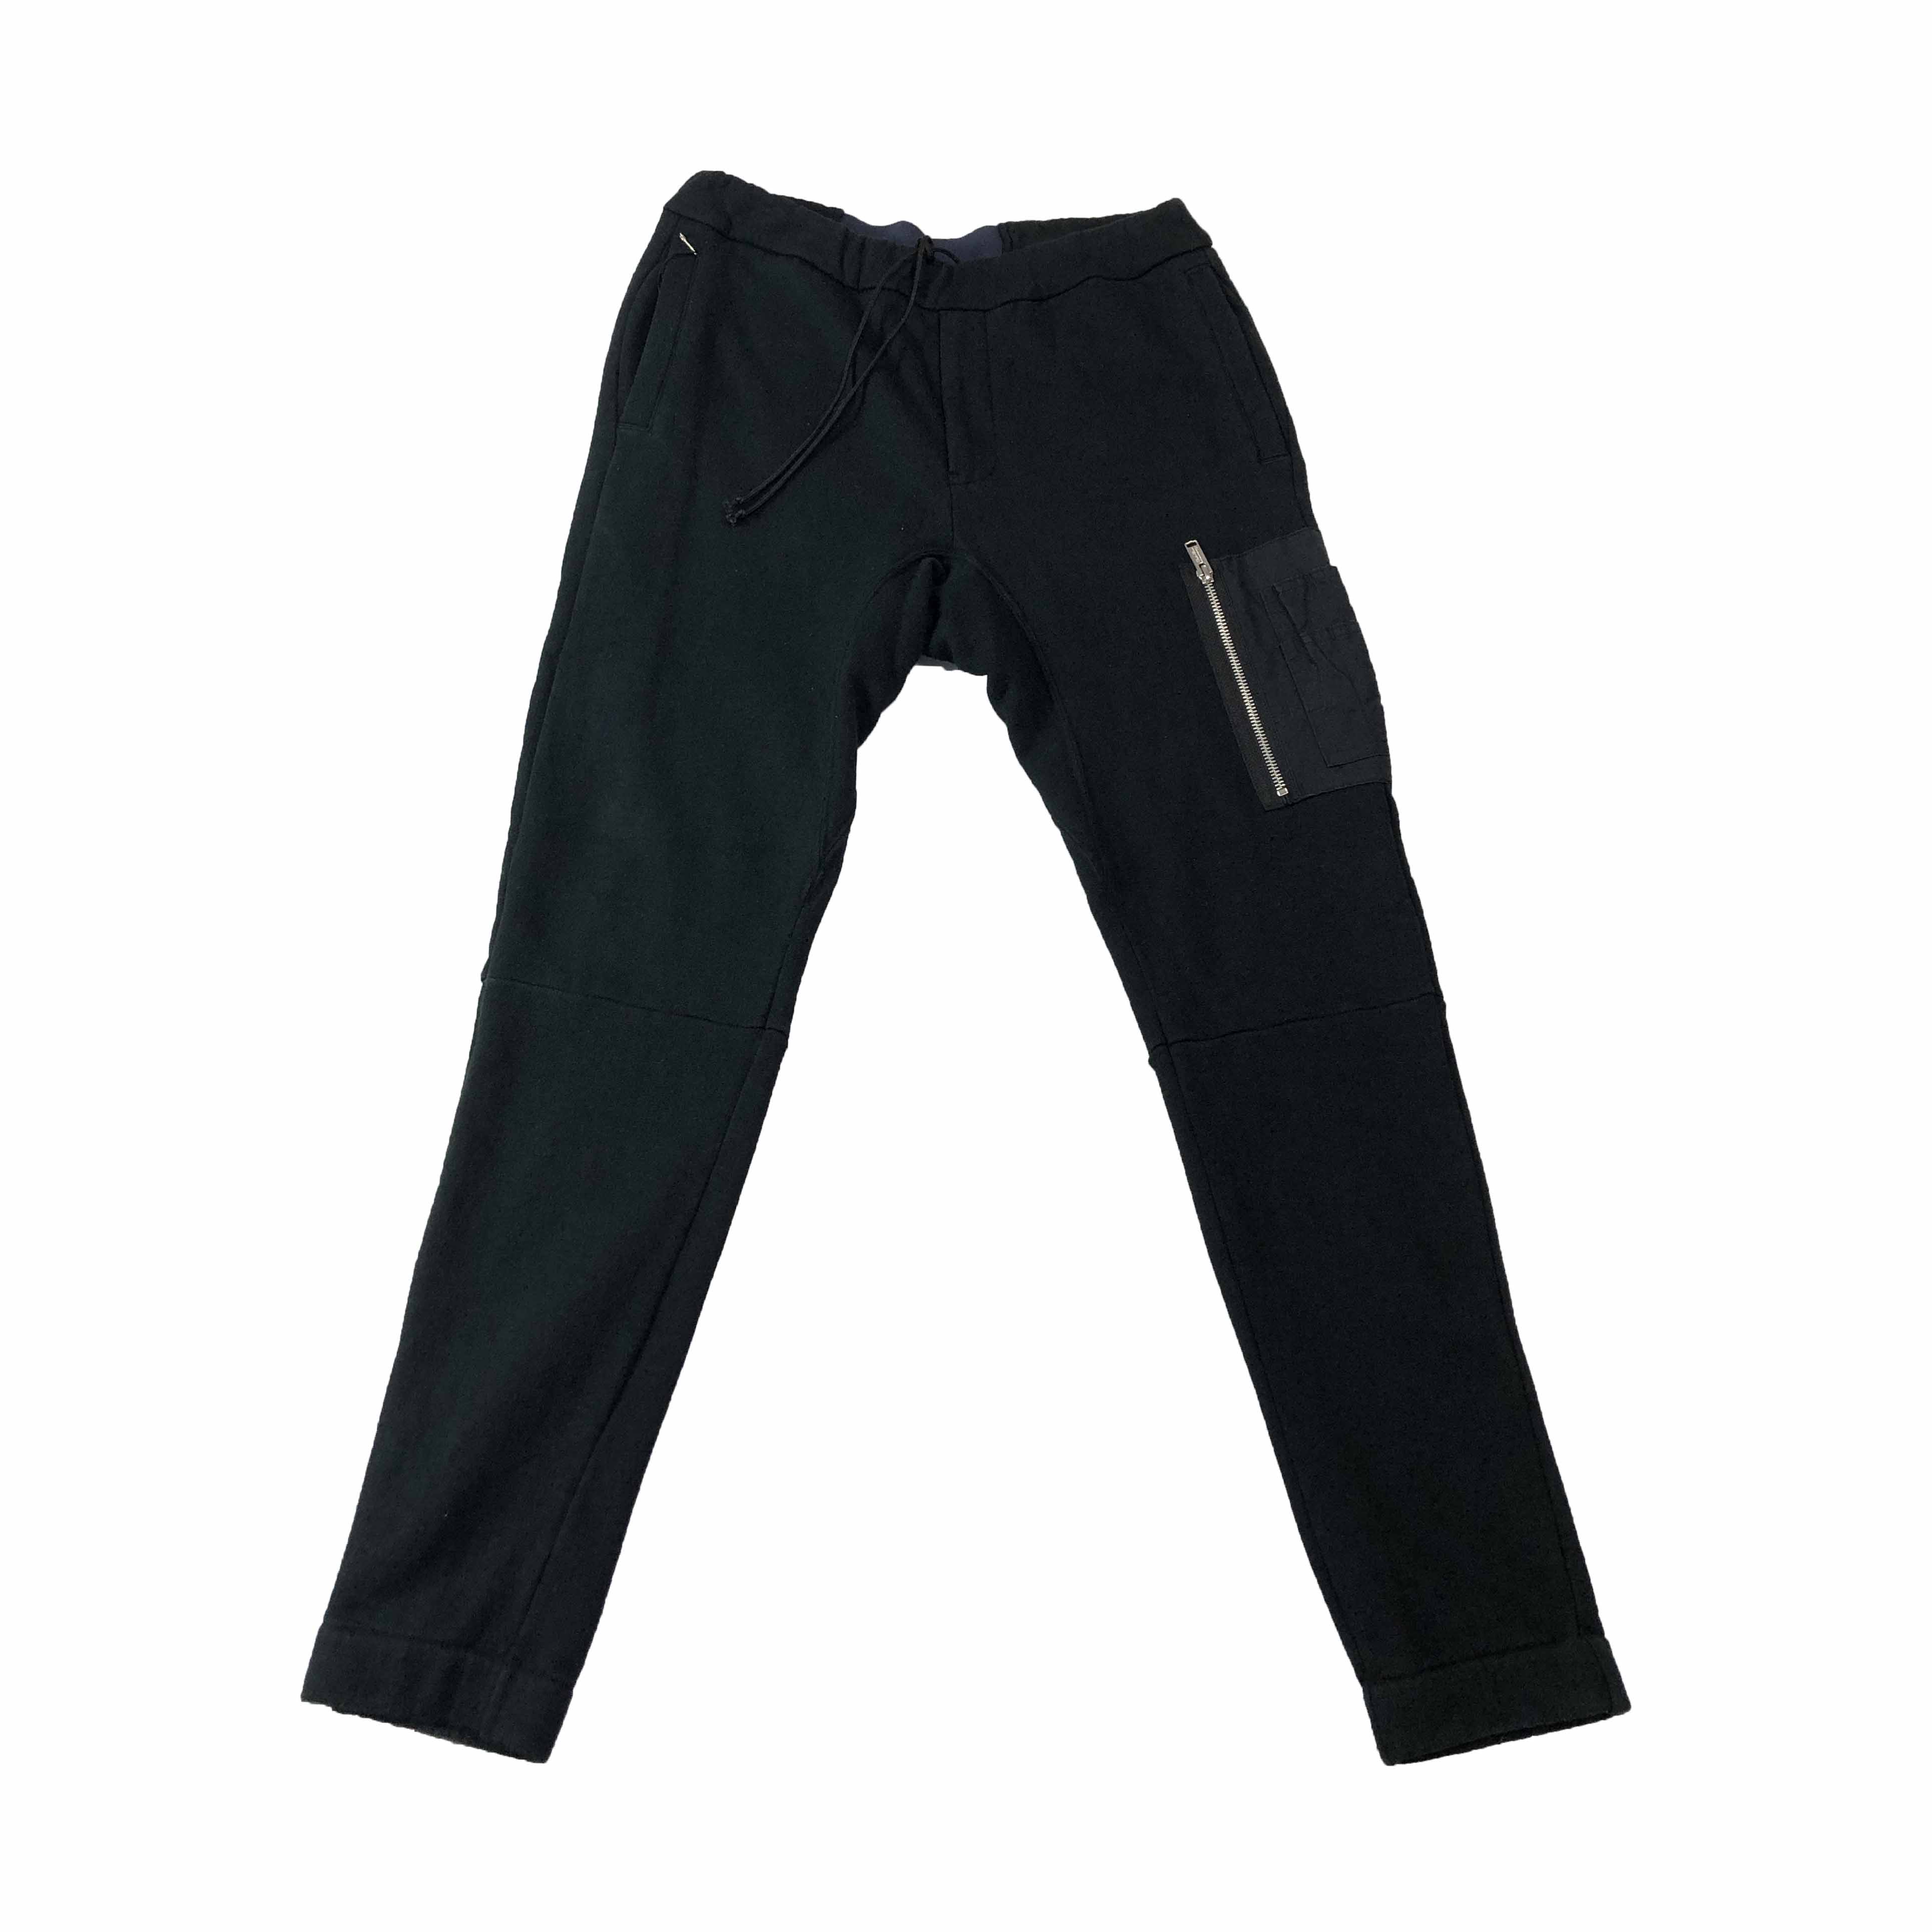 [Undercover] John Undercover Track Pants - Size 2